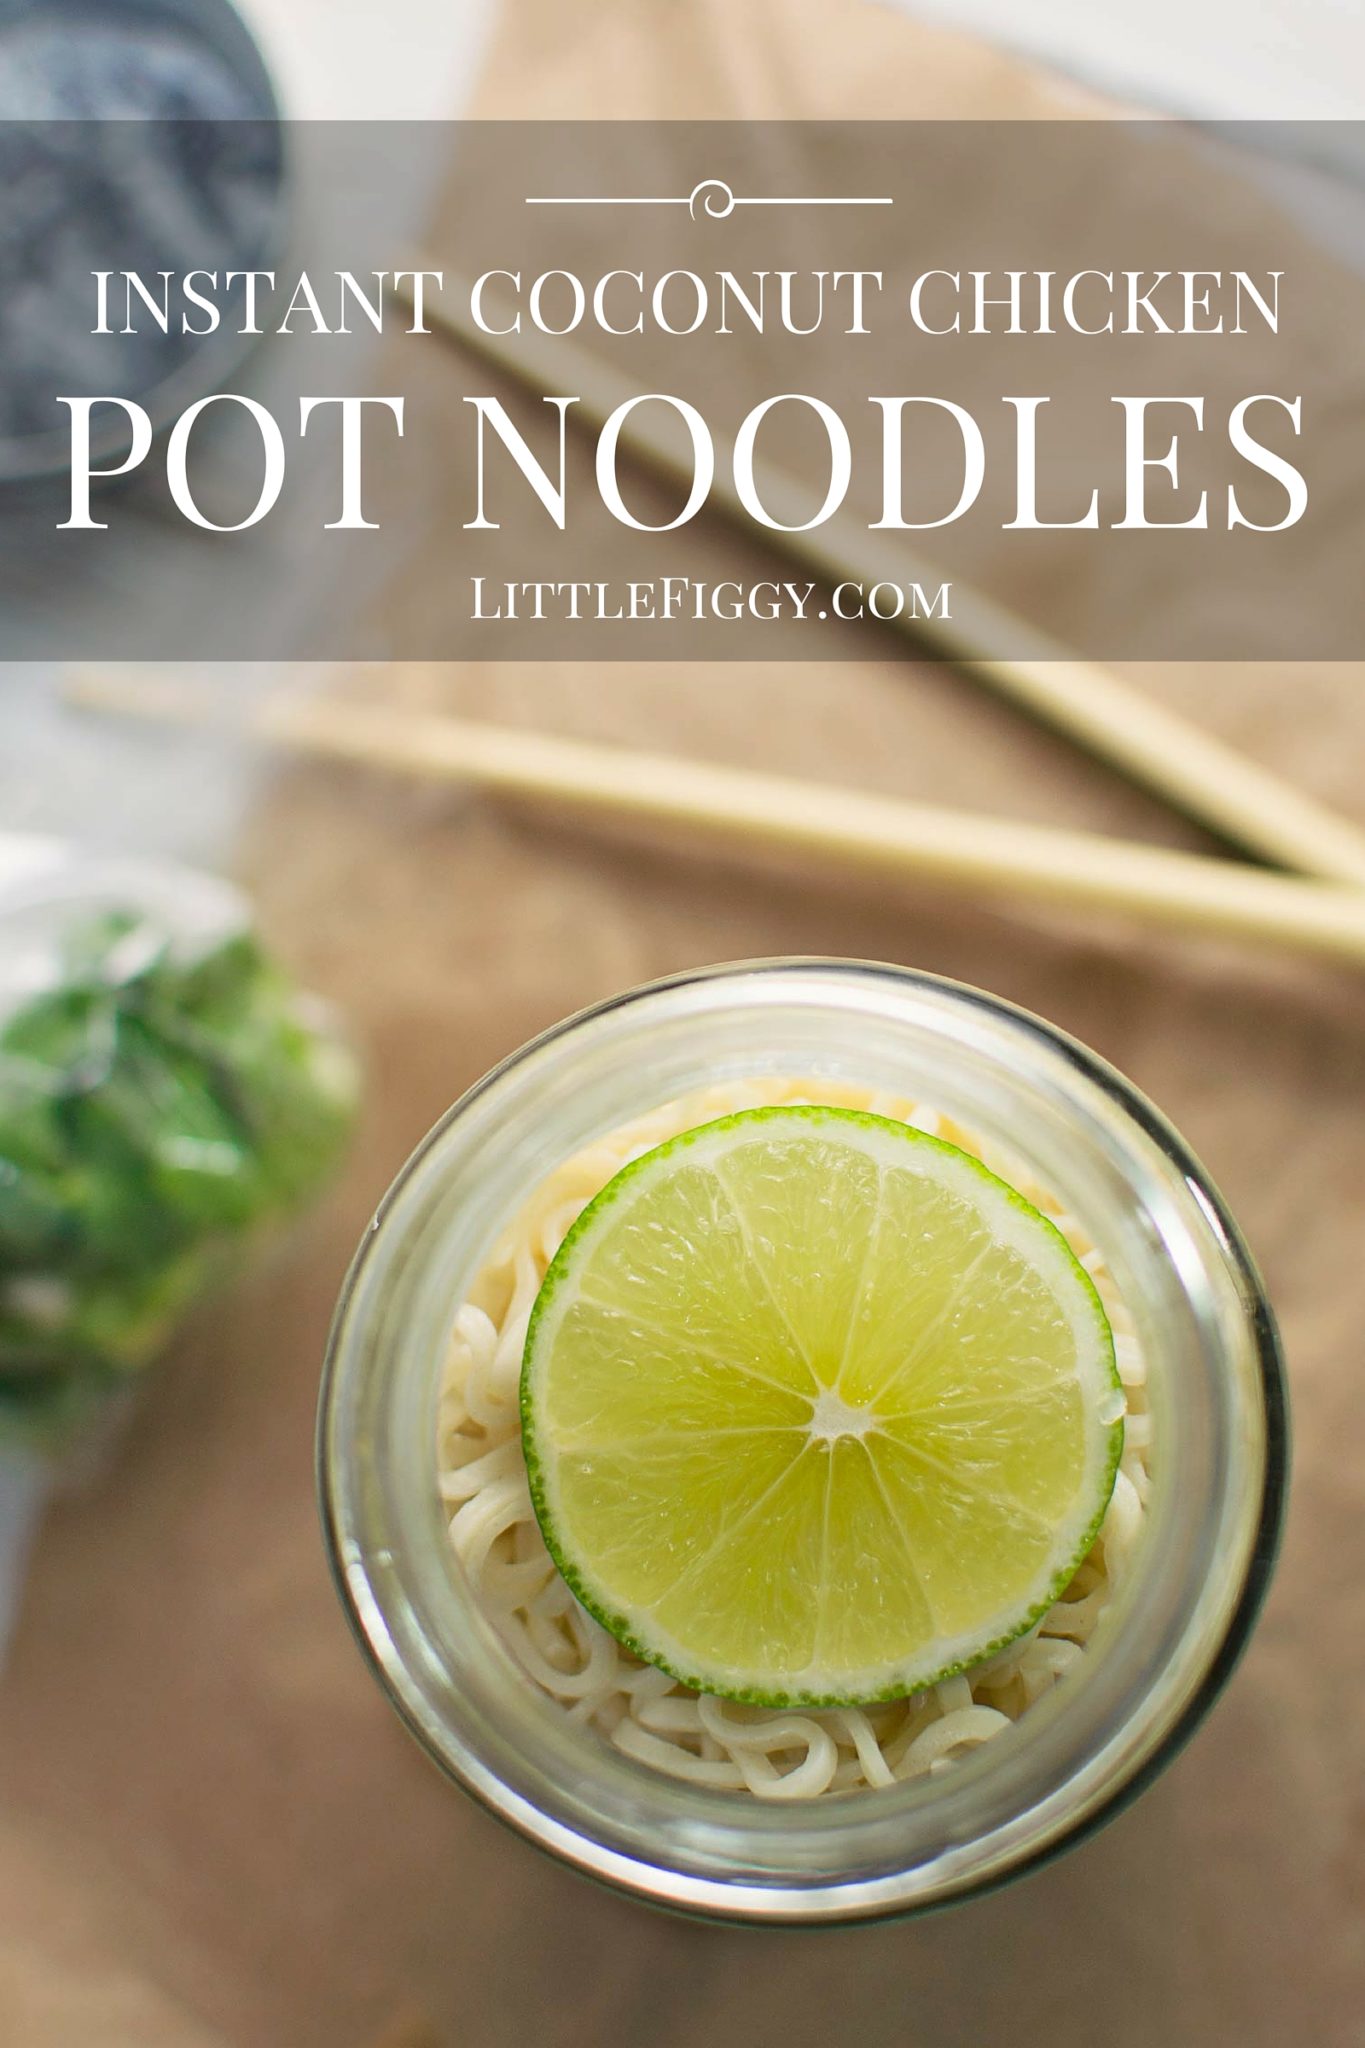 Thai Chicken Instant Pot Noodles - #InstantNoodles - @LittleFiggyFood - Easy to make and full of flavor, the perfect DIY and portable lunch, instant pot noodles.